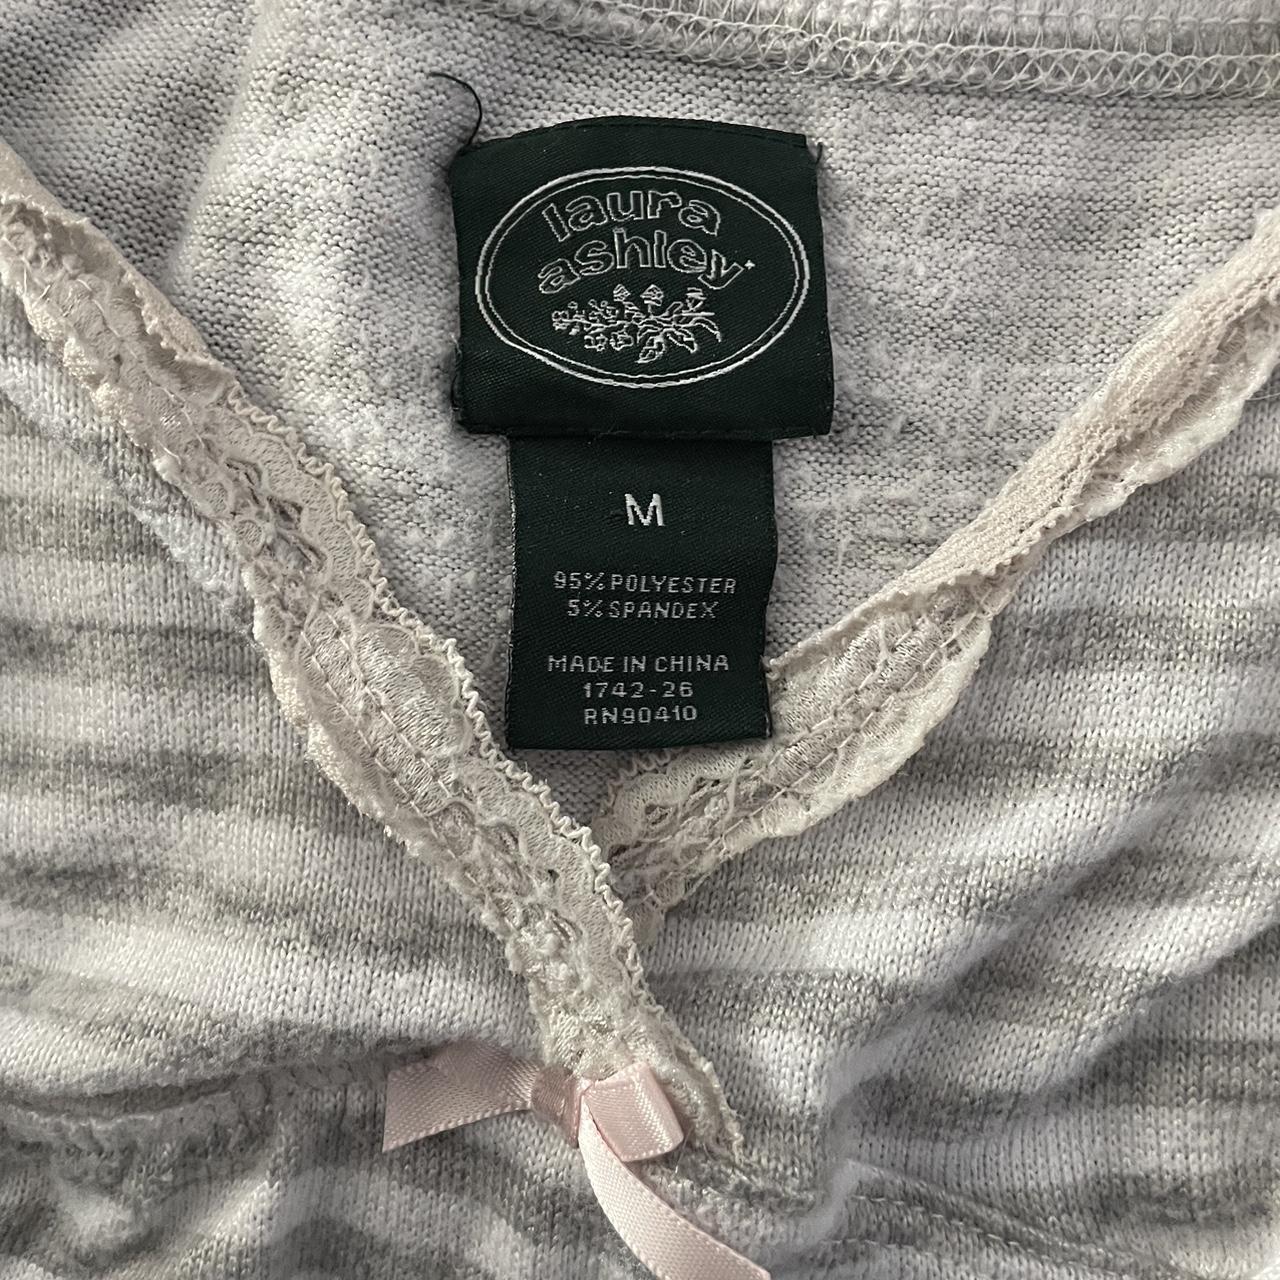 Laura Ashley grey stripped nightgown- Size M but I... - Depop